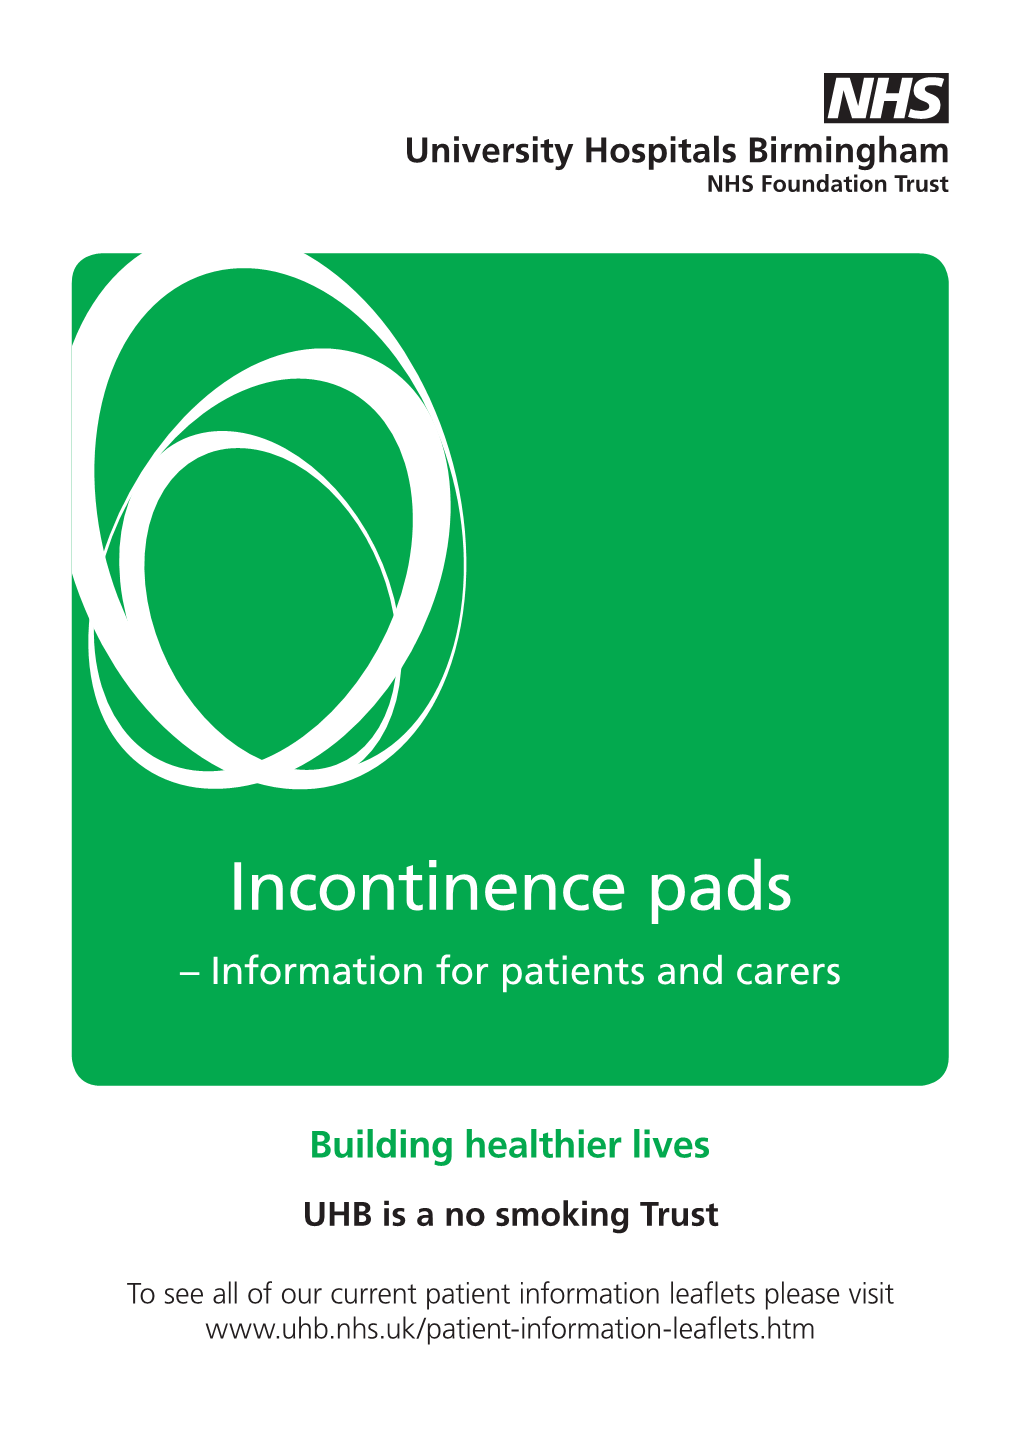 Incontinence Pads – Information for Patients and Carers